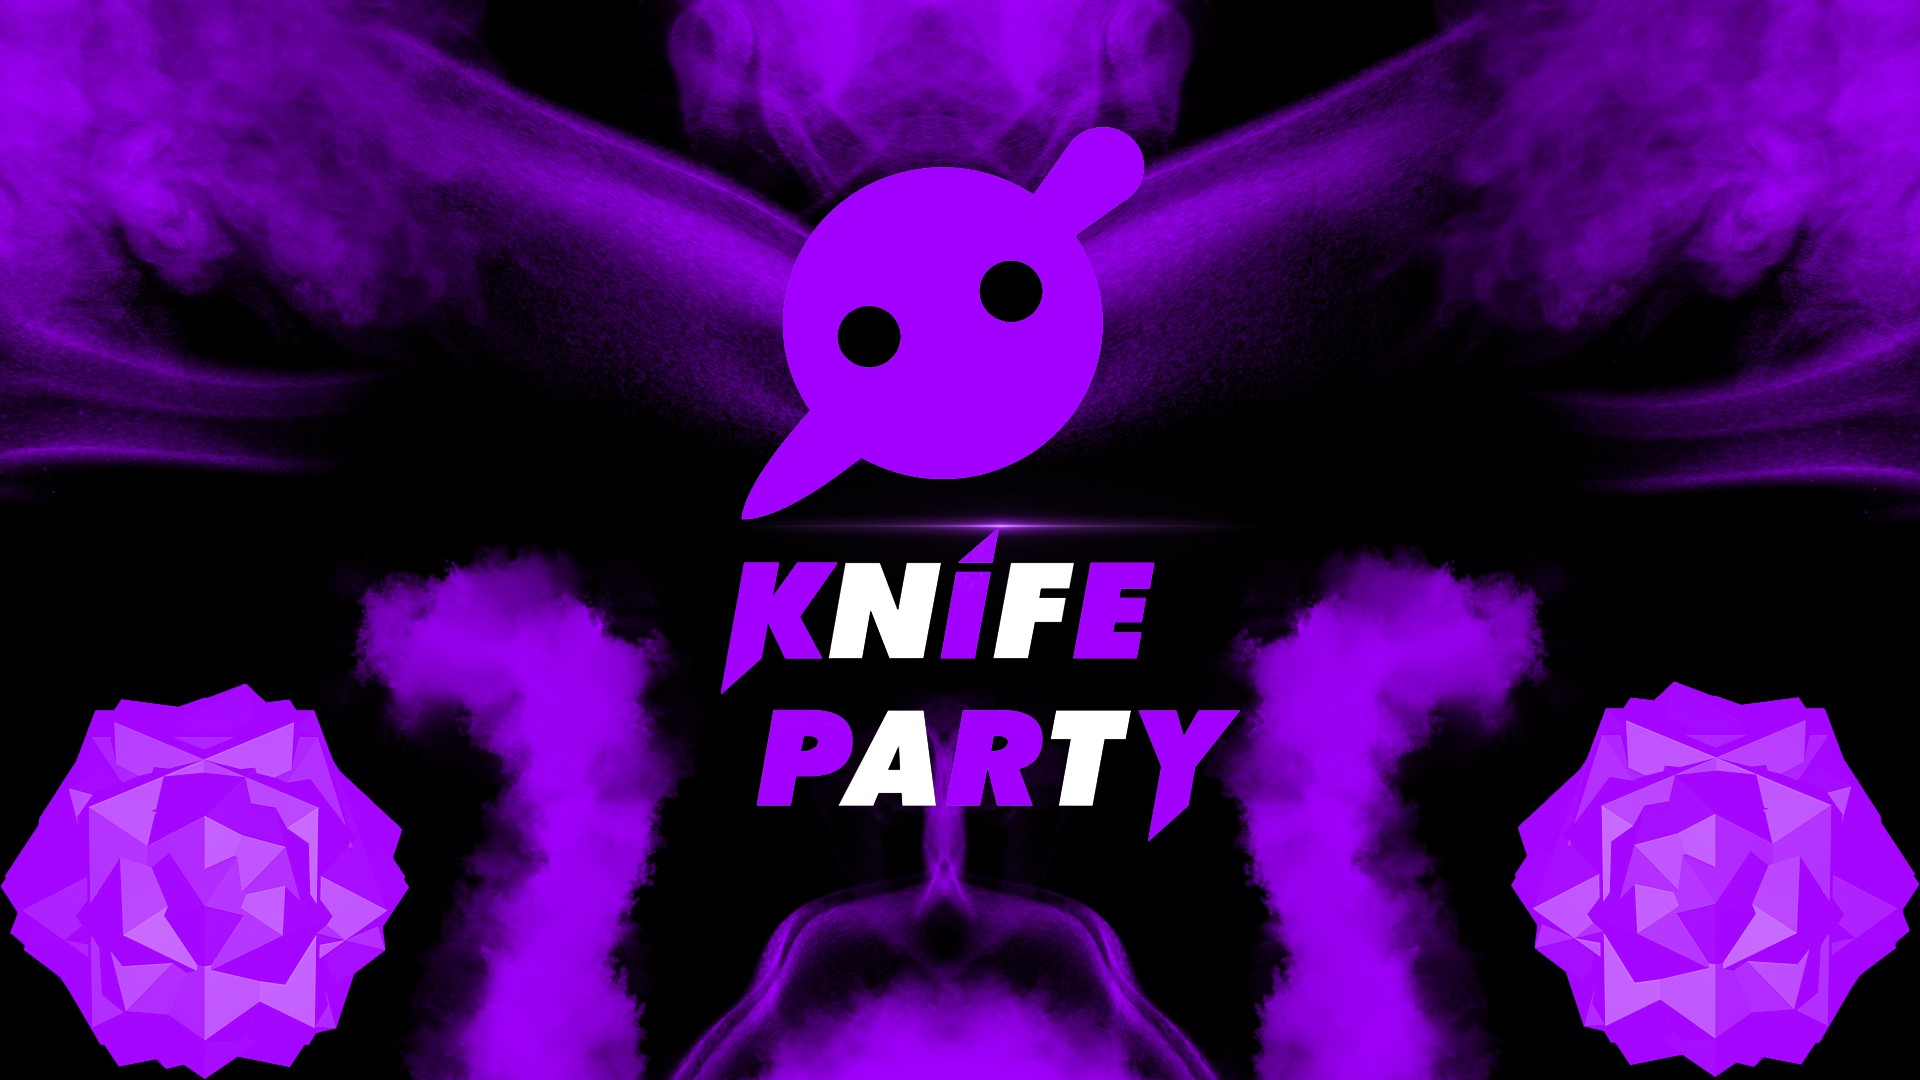 black, Music, White, Purple, Lens, Flare, Electro, Dubstep, Knife, Party Wallpaper